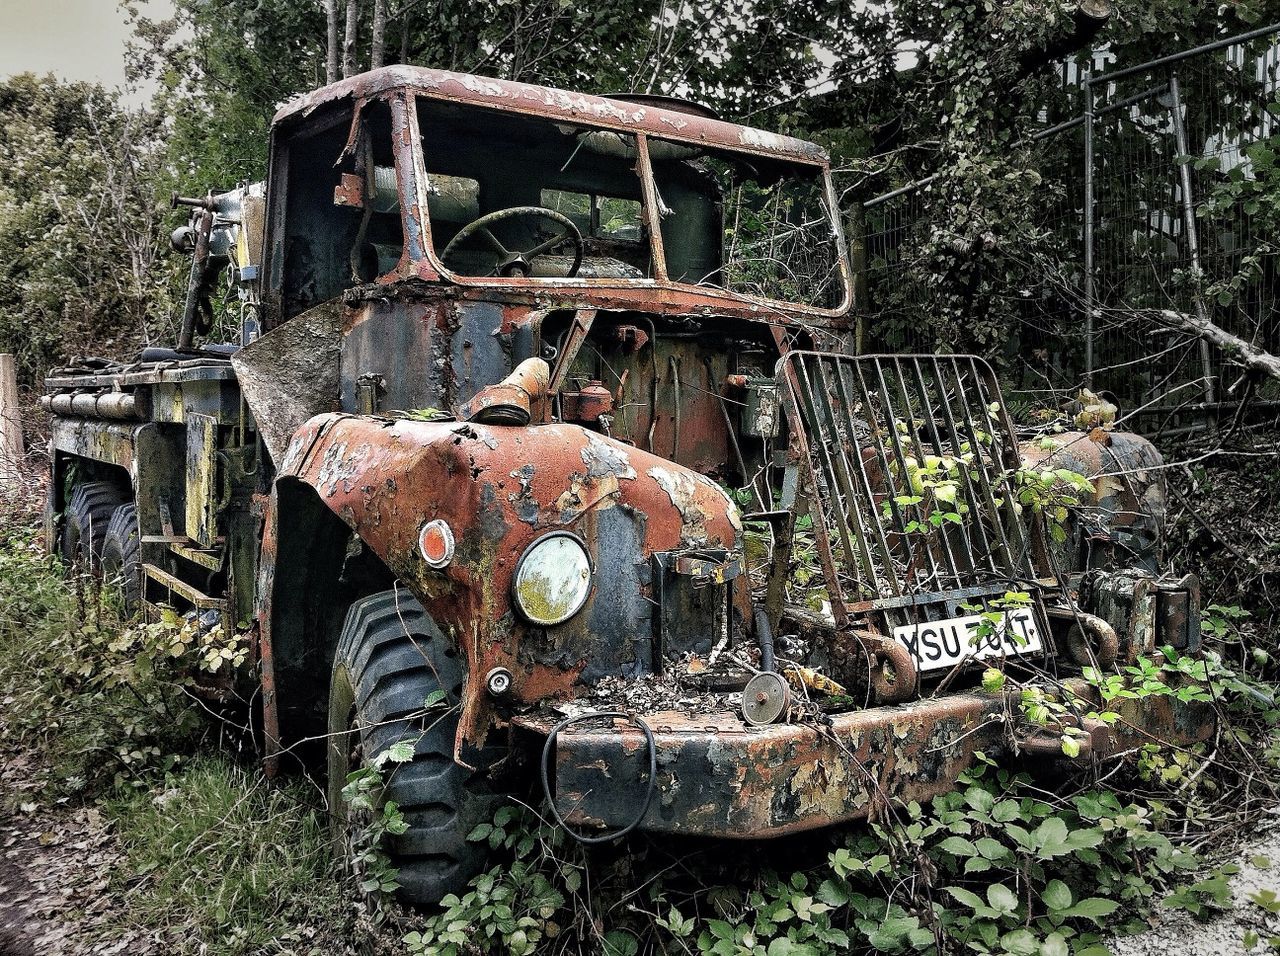 abandoned, obsolete, rusty, run-down, deterioration, old, damaged, metal, weathered, bad condition, transportation, tree, mode of transport, machinery, old-fashioned, field, metallic, day, outdoors, land vehicle